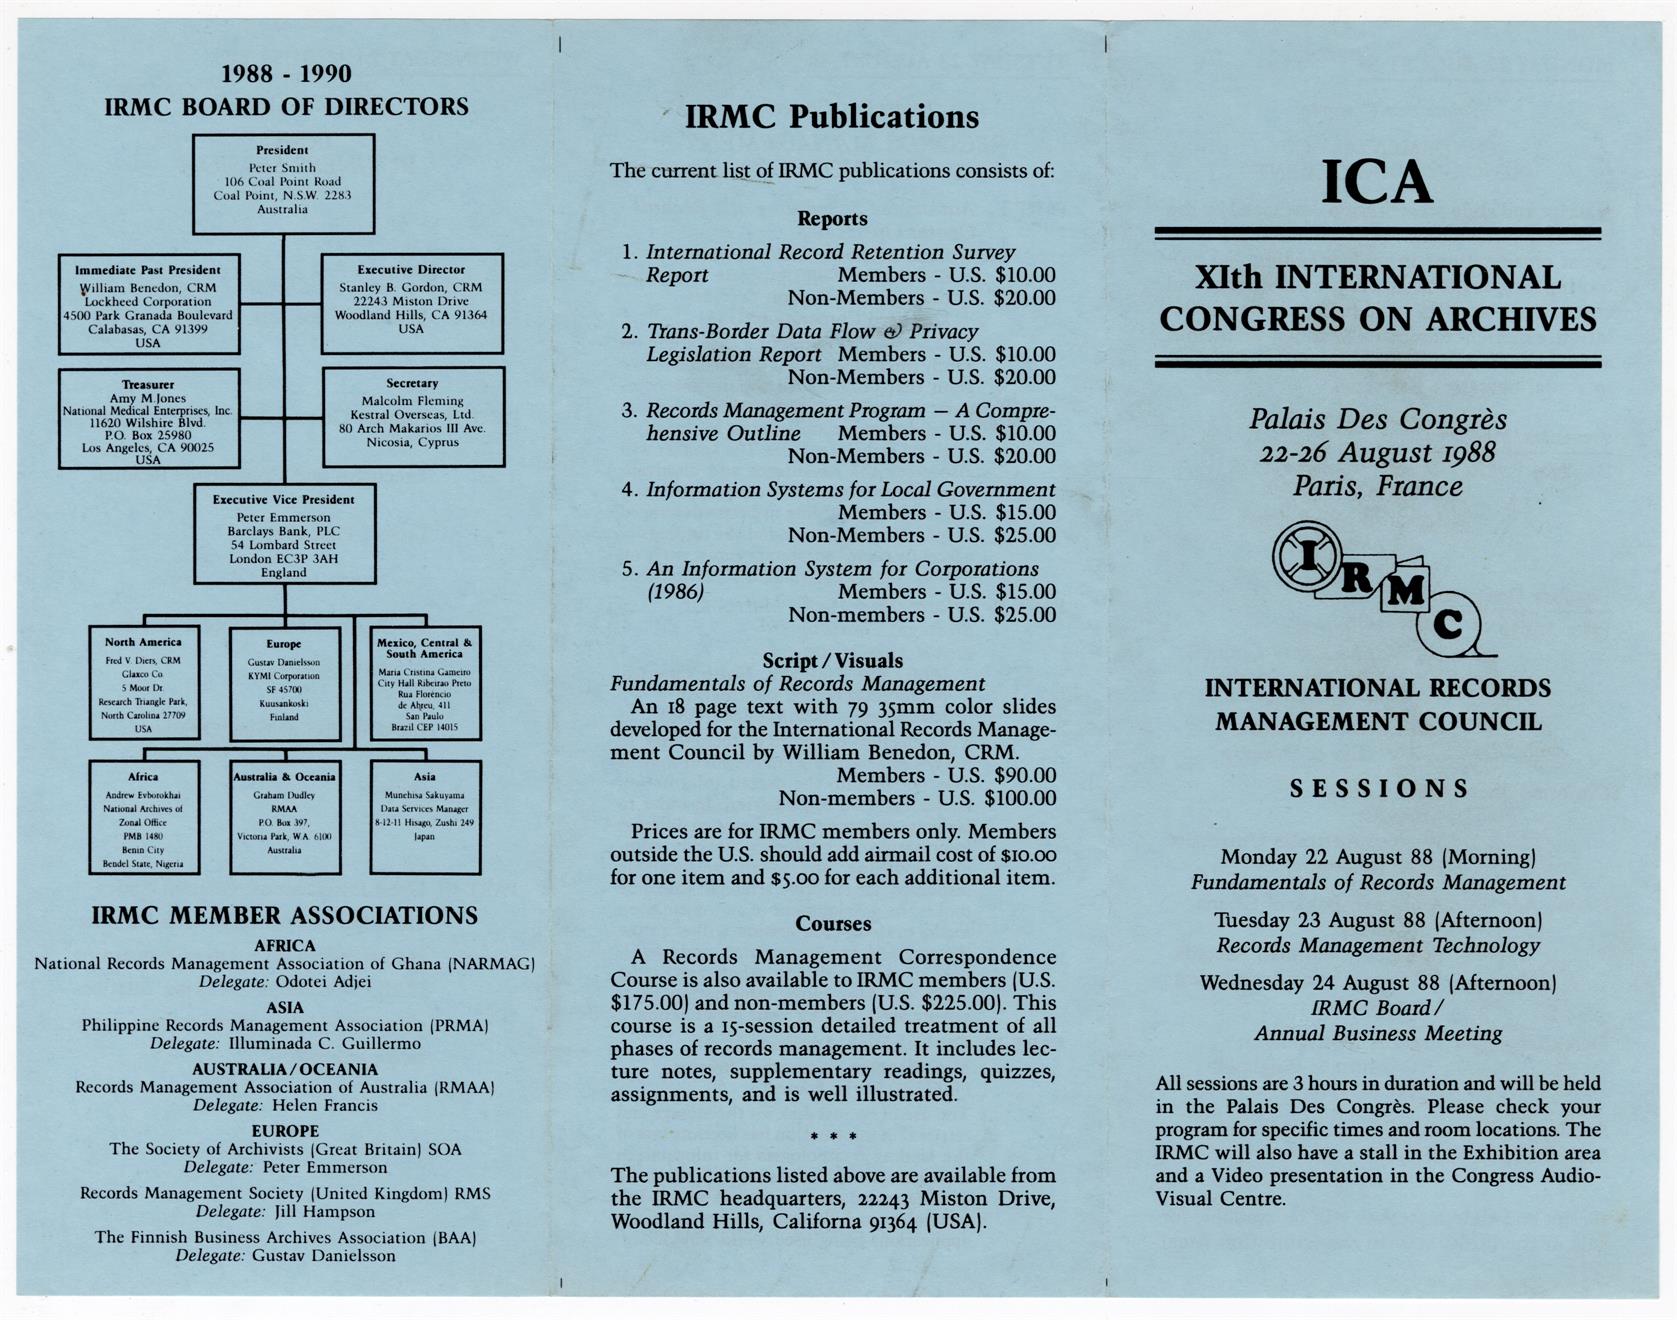 ICA: XIth International Congress on Archives